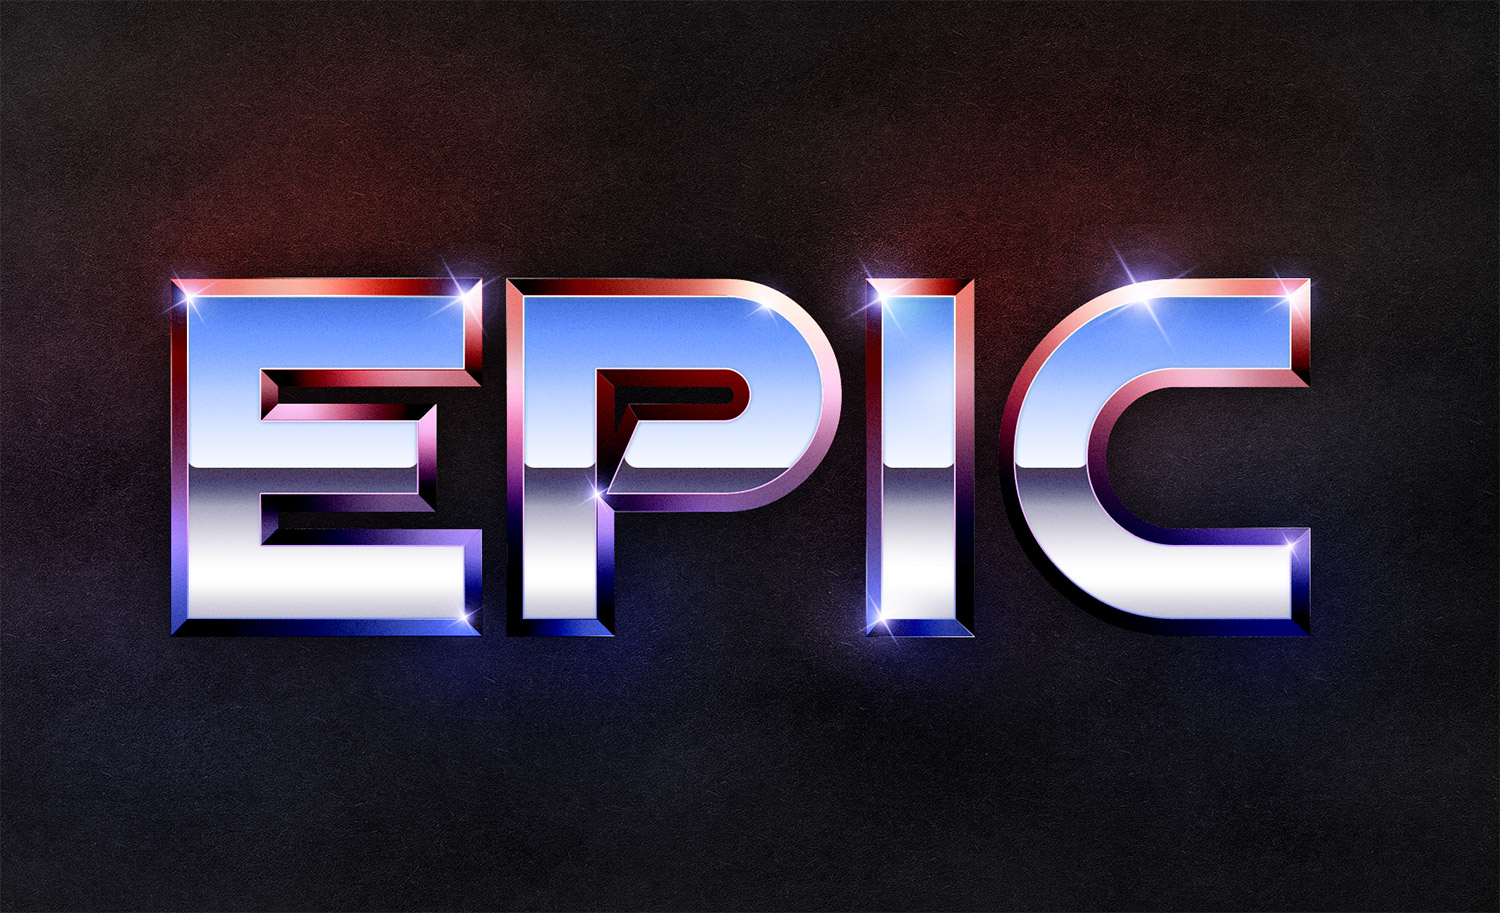 overlapping repeating 80s style text effect photoshop